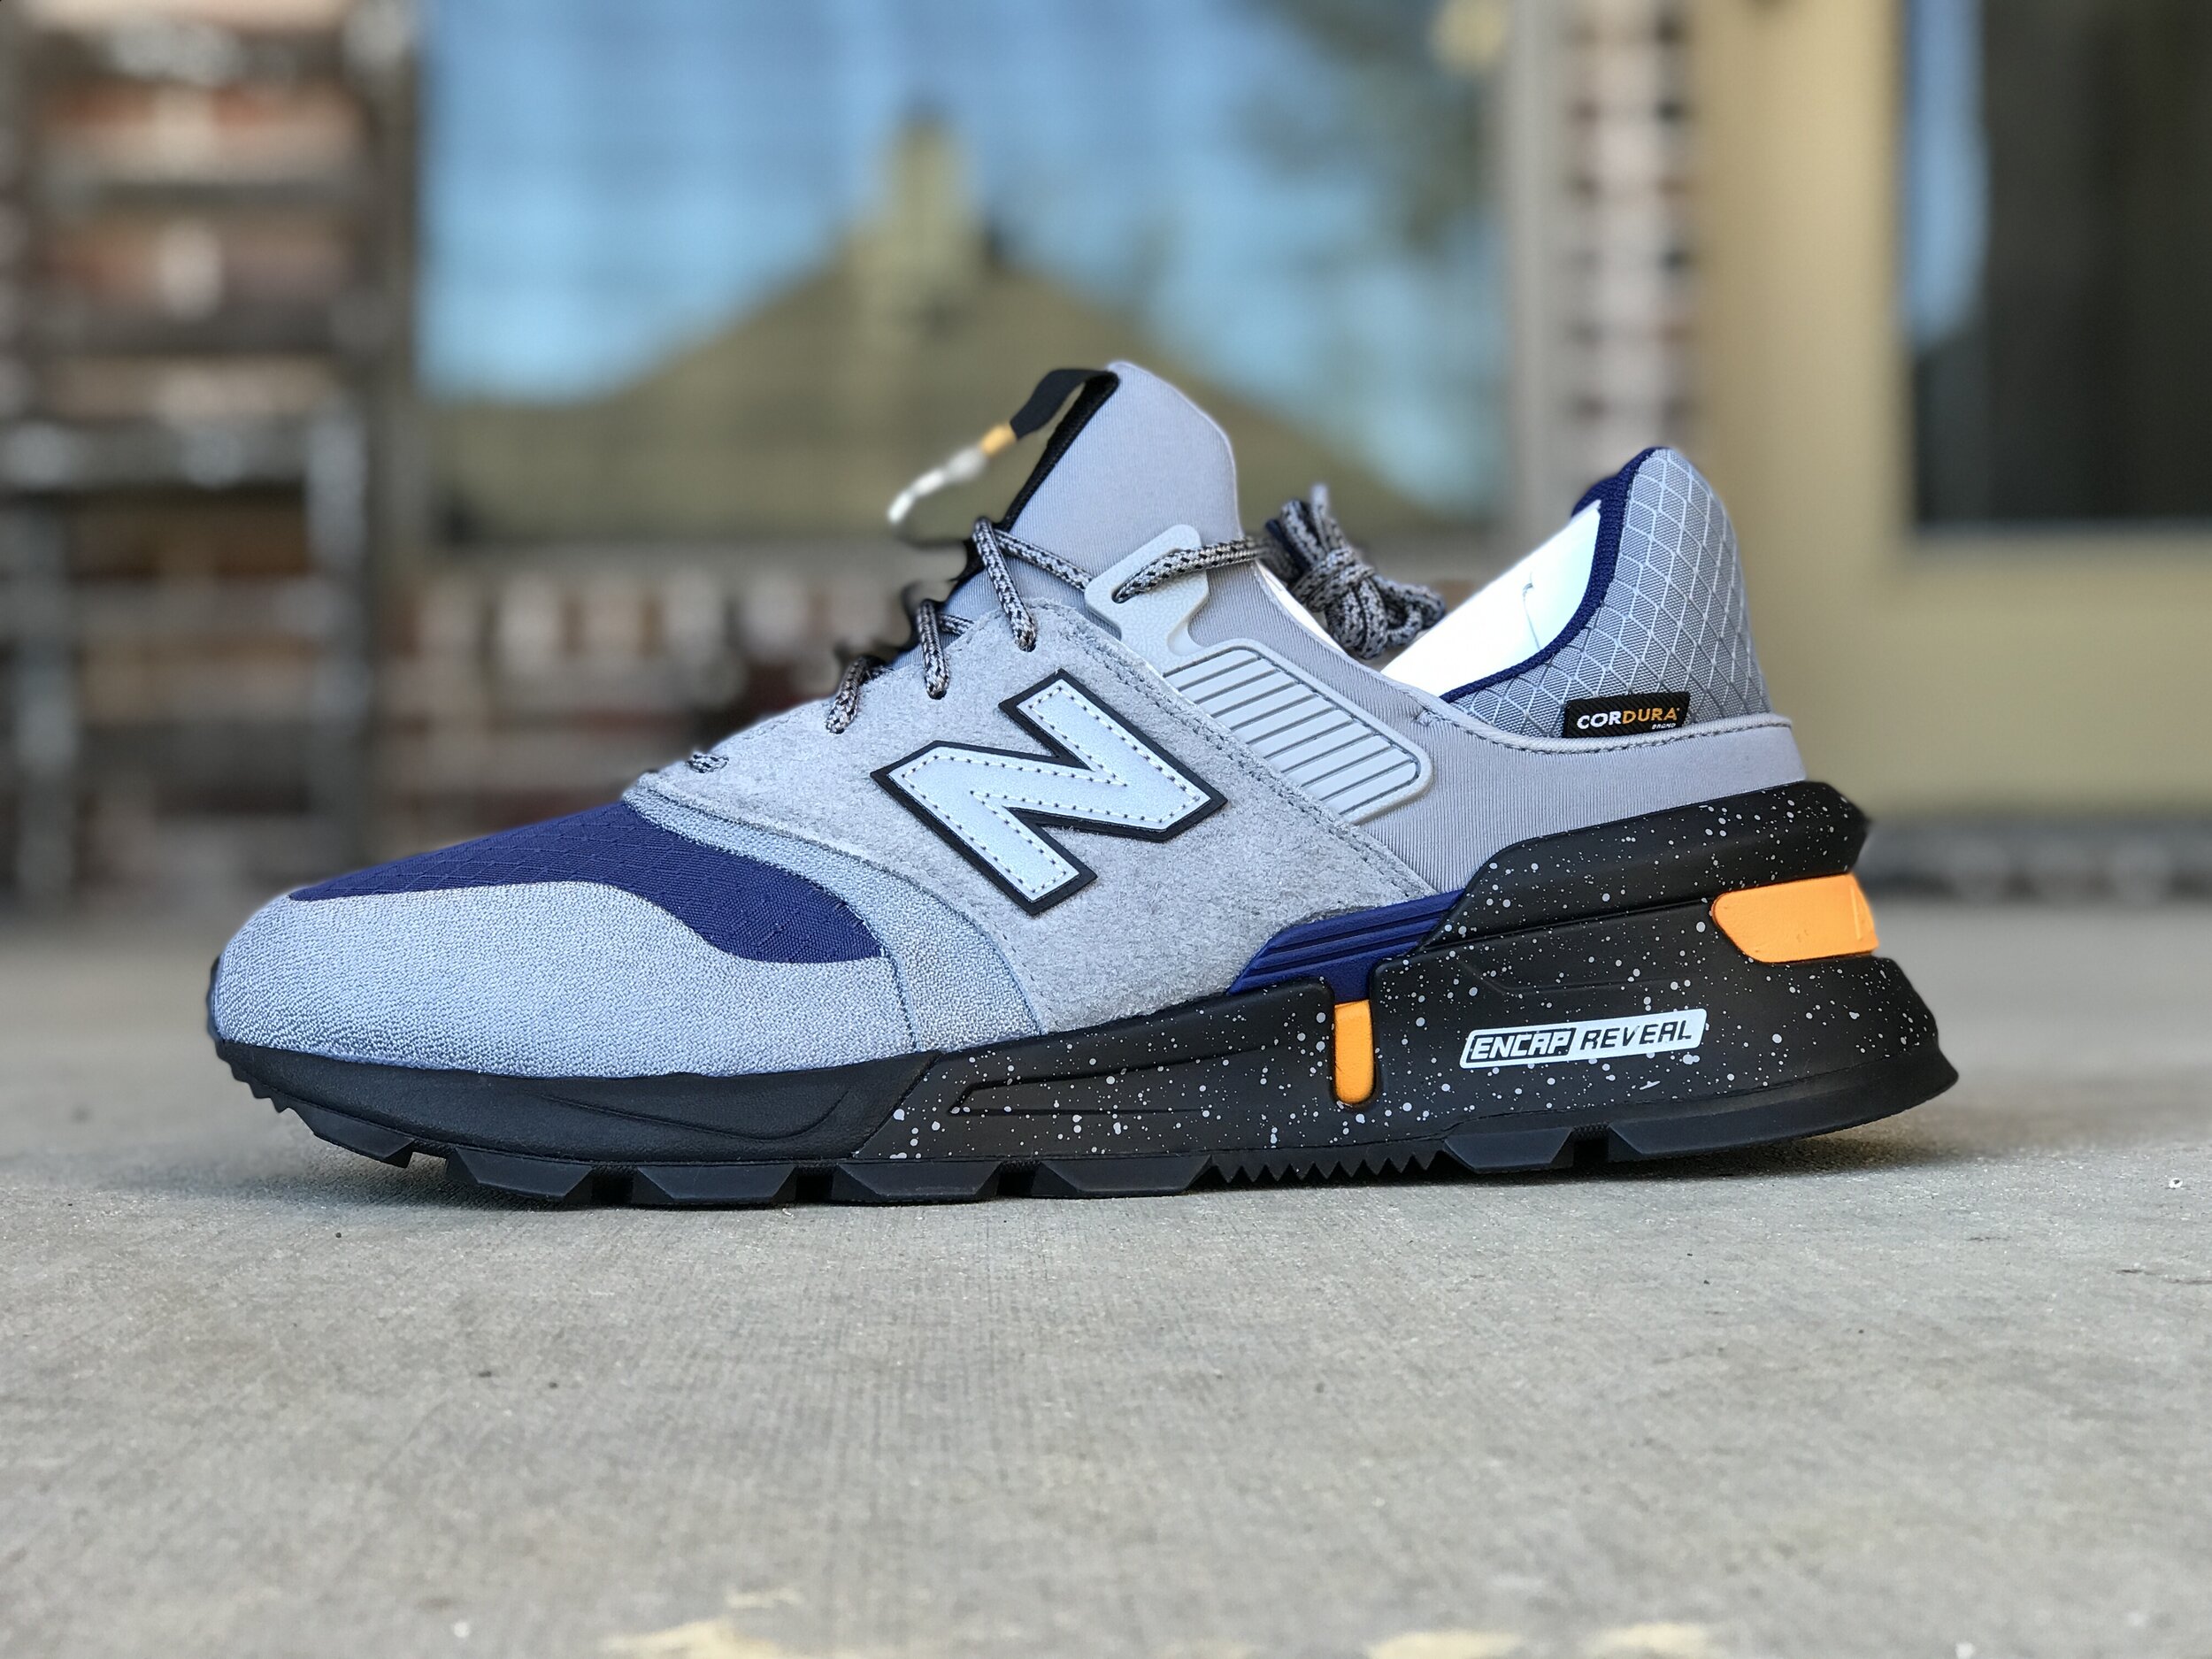 Unboxing The New Balance 997 Sport 